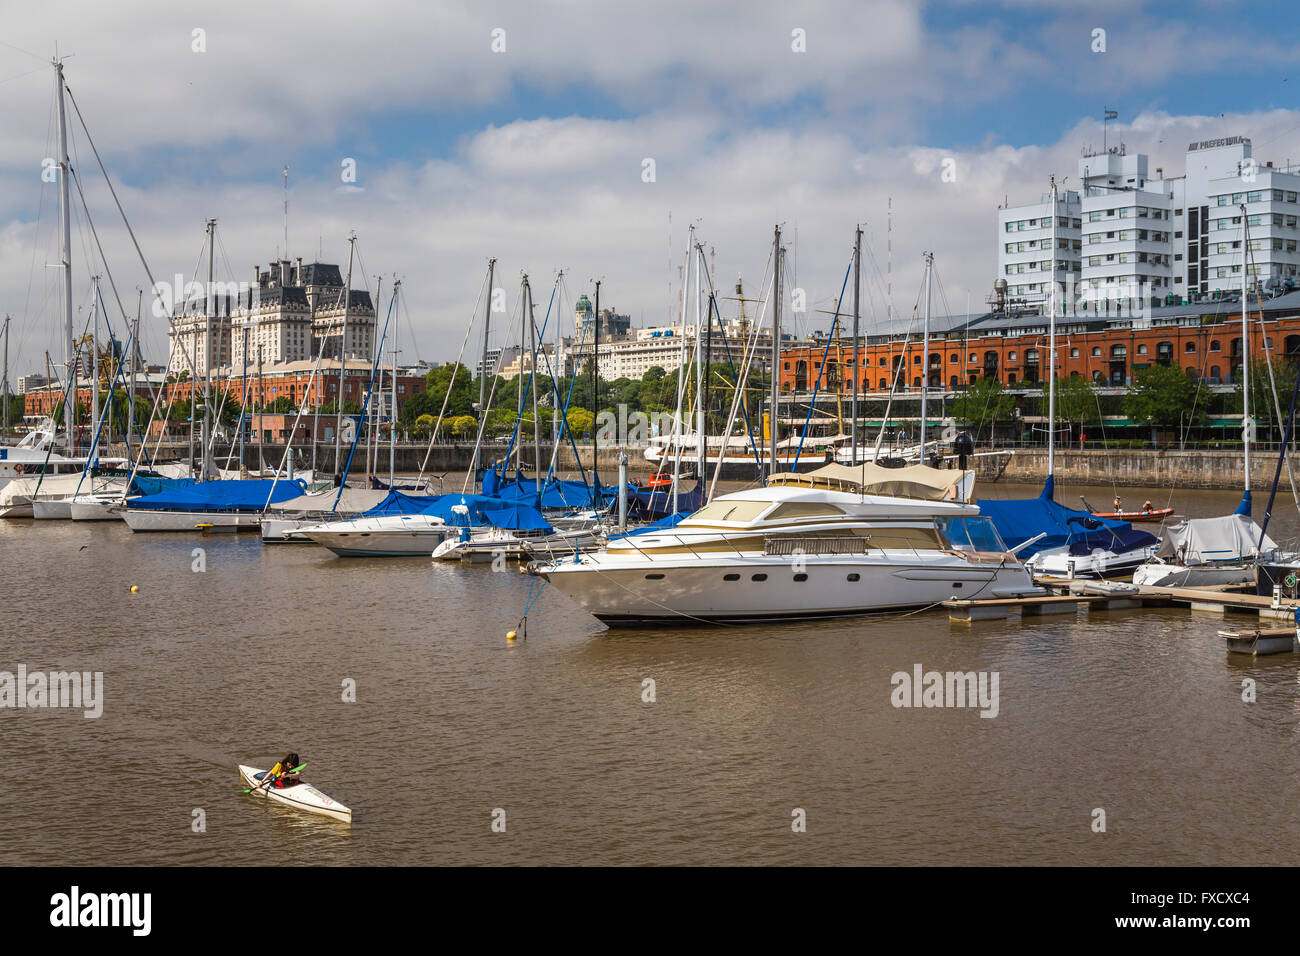 The marina and yacht club in the waterfront district of Puerto Madero, Buenos Aires, Argentina, South America. Stock Photo